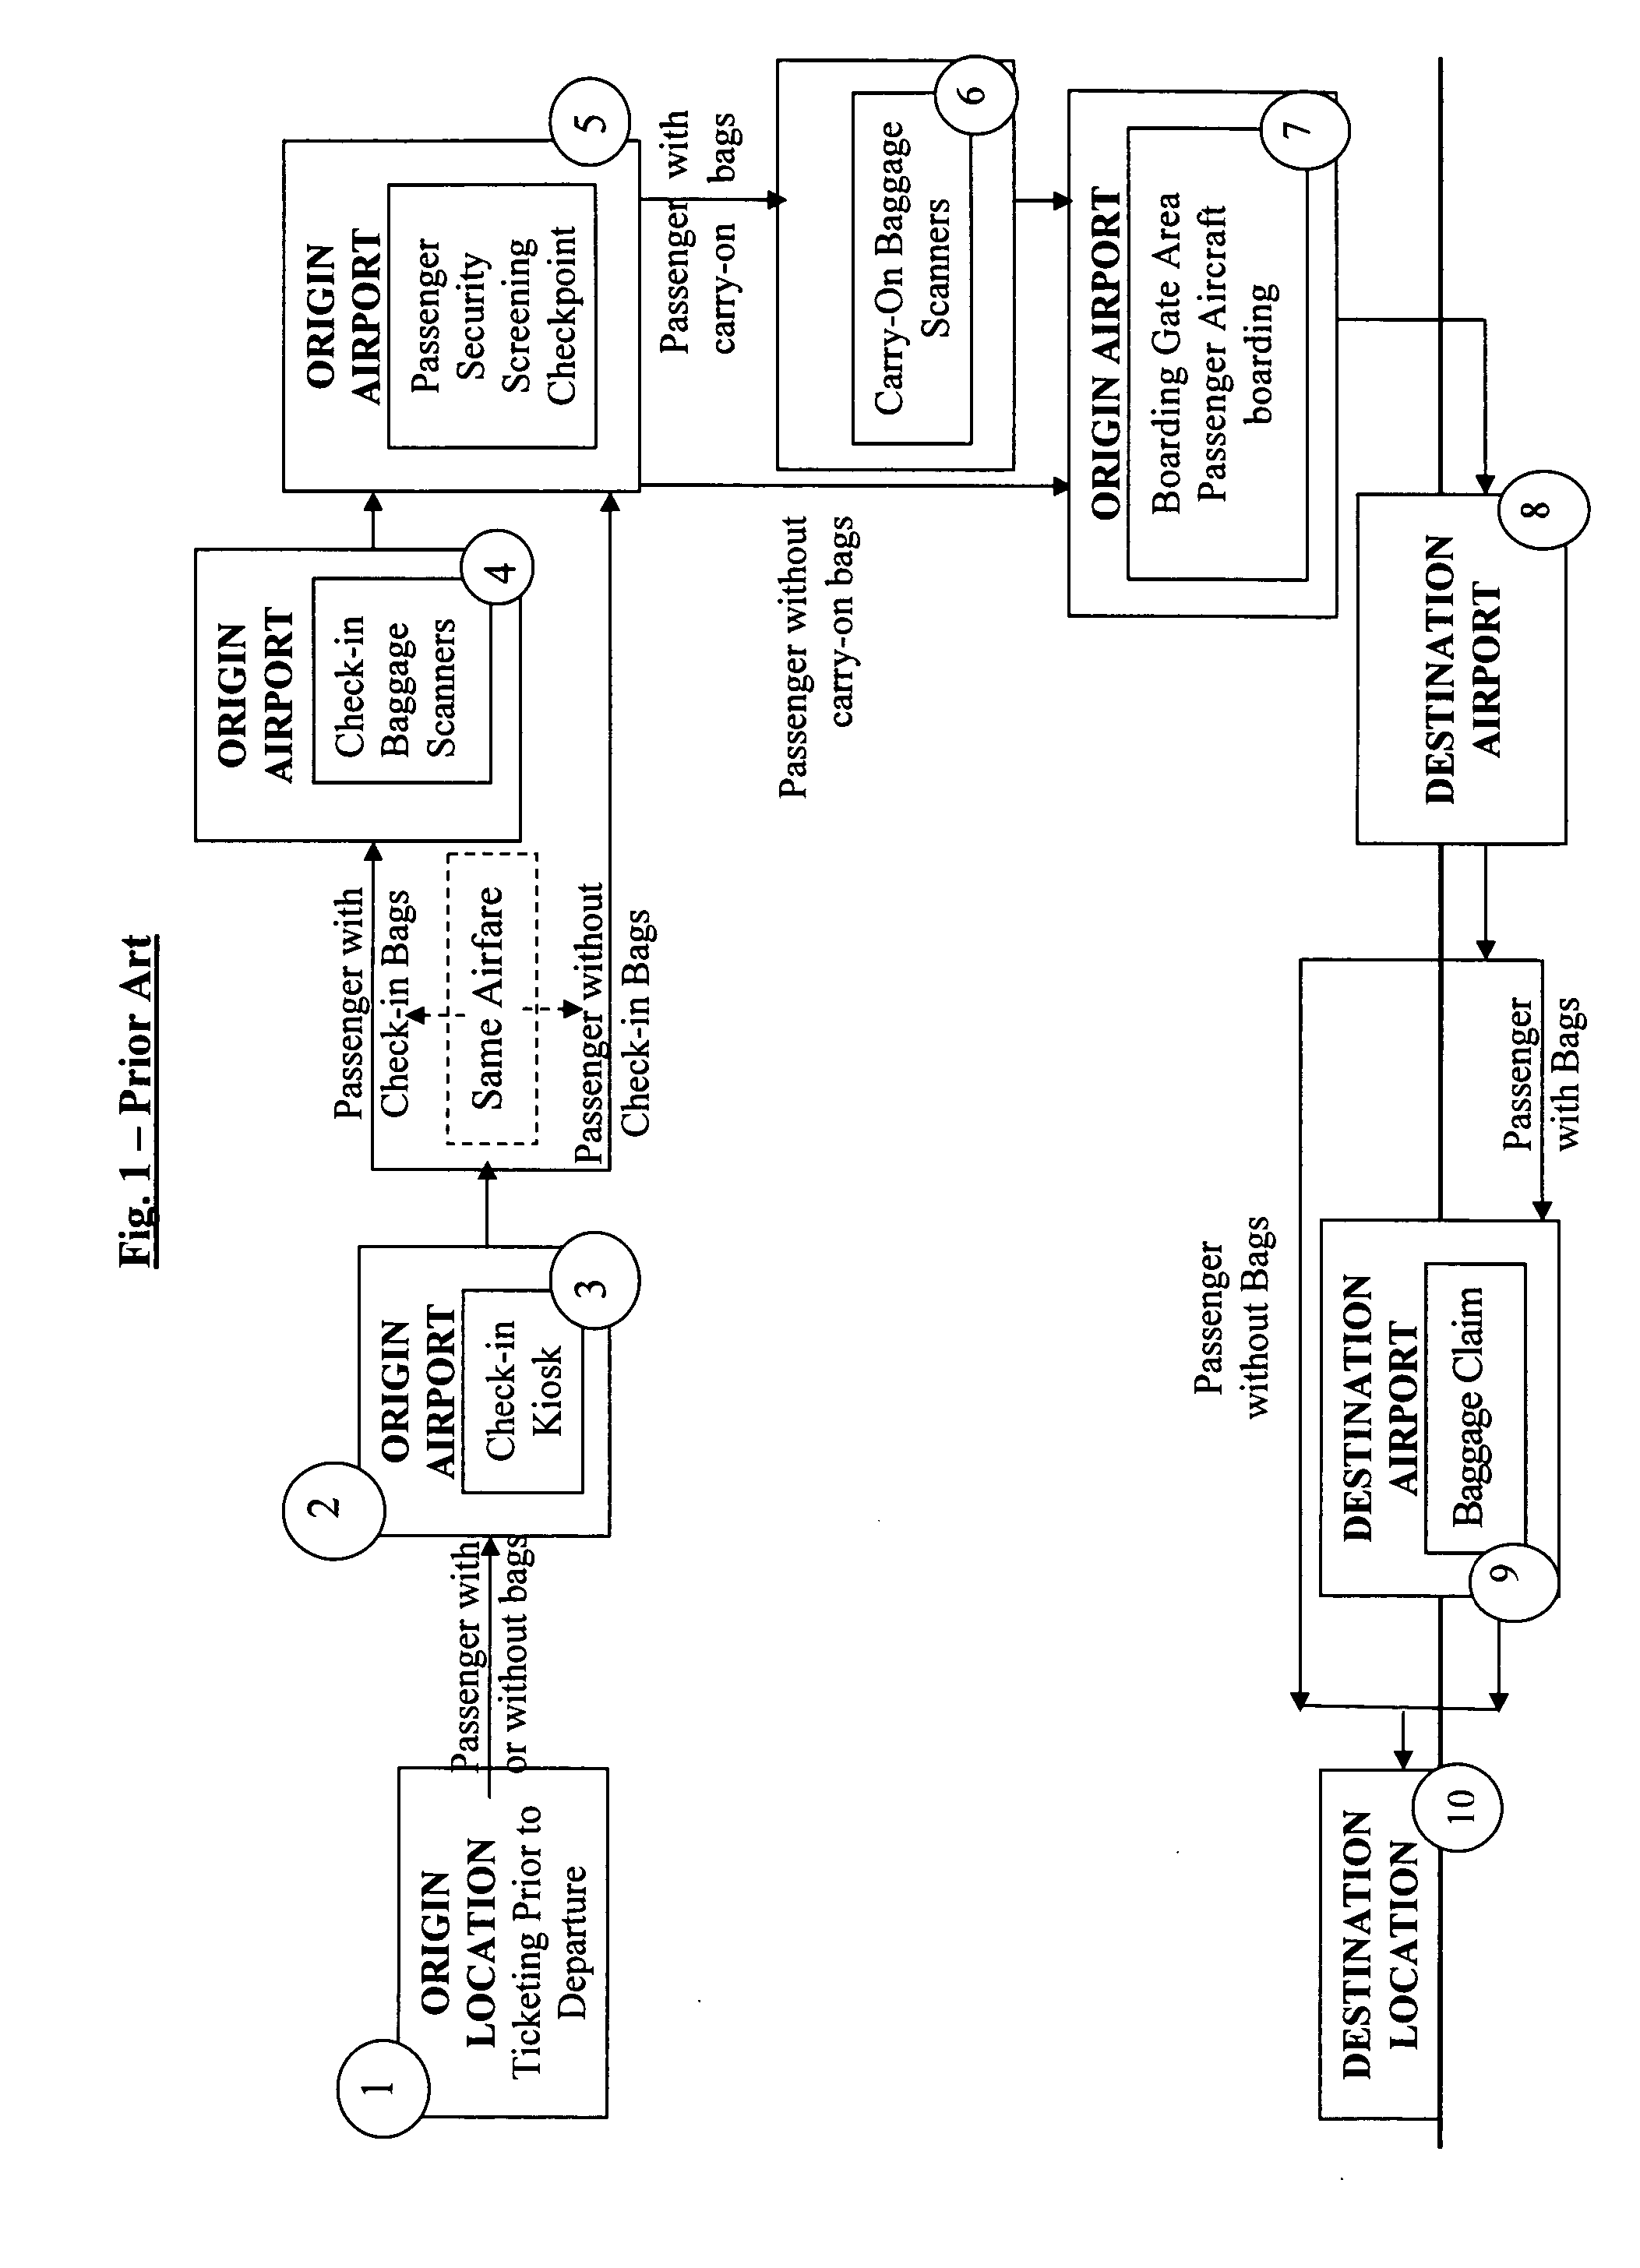 System and method for unbundling baggage costs from airfare prices